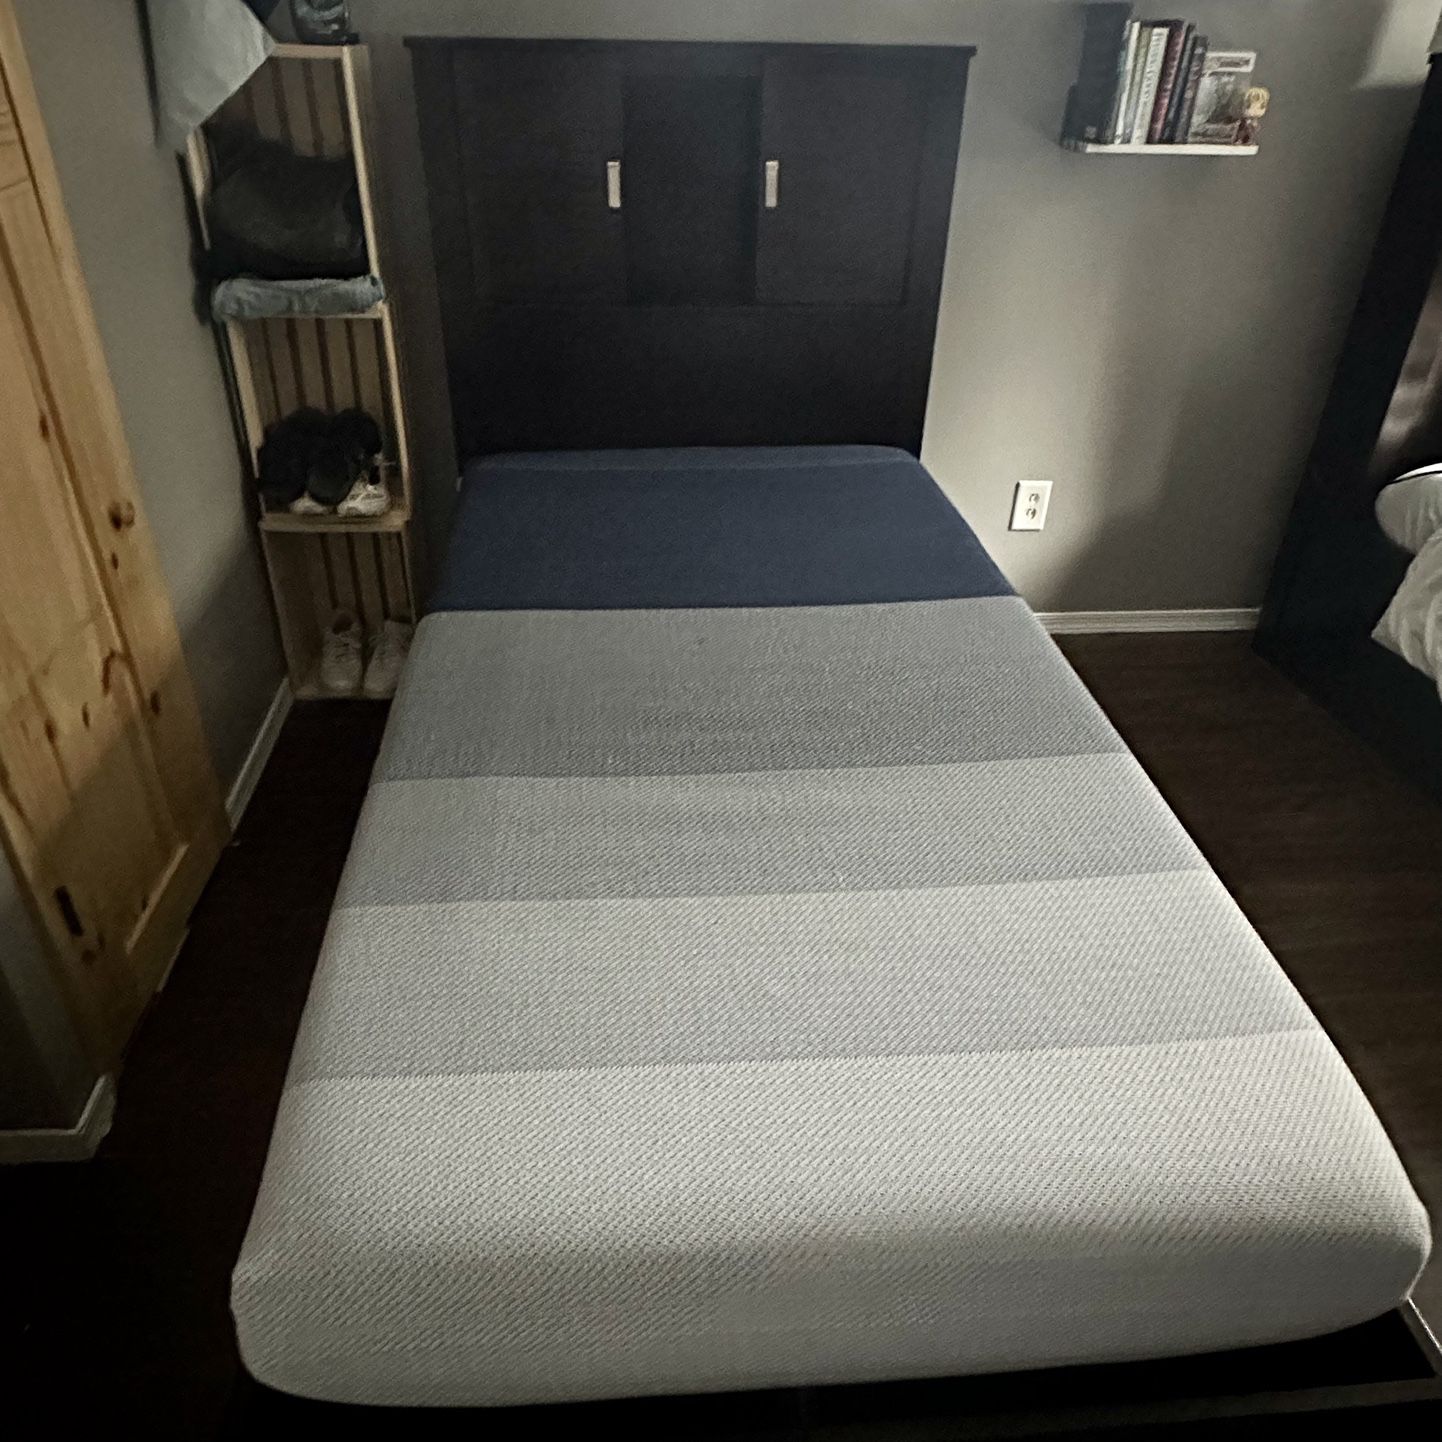 Almost Brand New twin Size Bed Frame, Headboard Plus Twin Size Mattress From Bob’s Furniture 